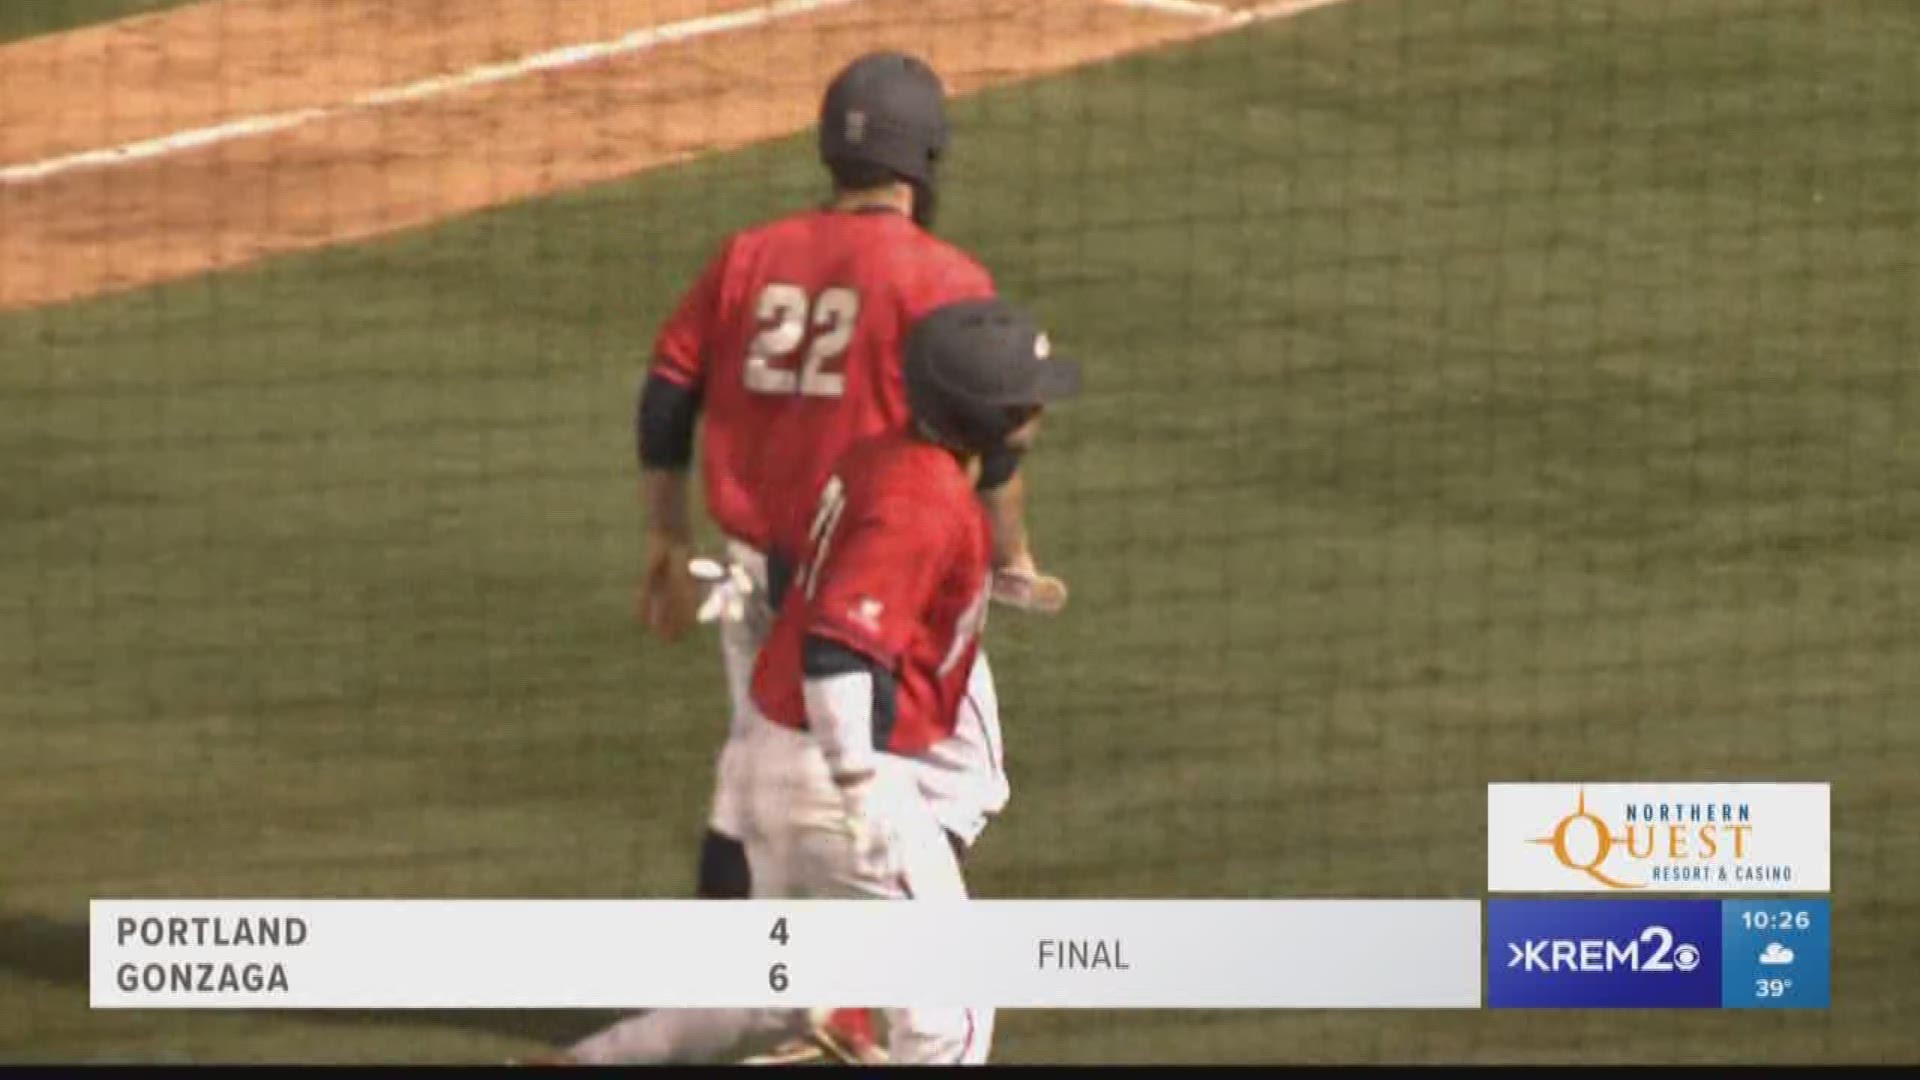 Bulldogs scored the game's final three runs for a 6-4 victory over Portland. (4-6-2018)